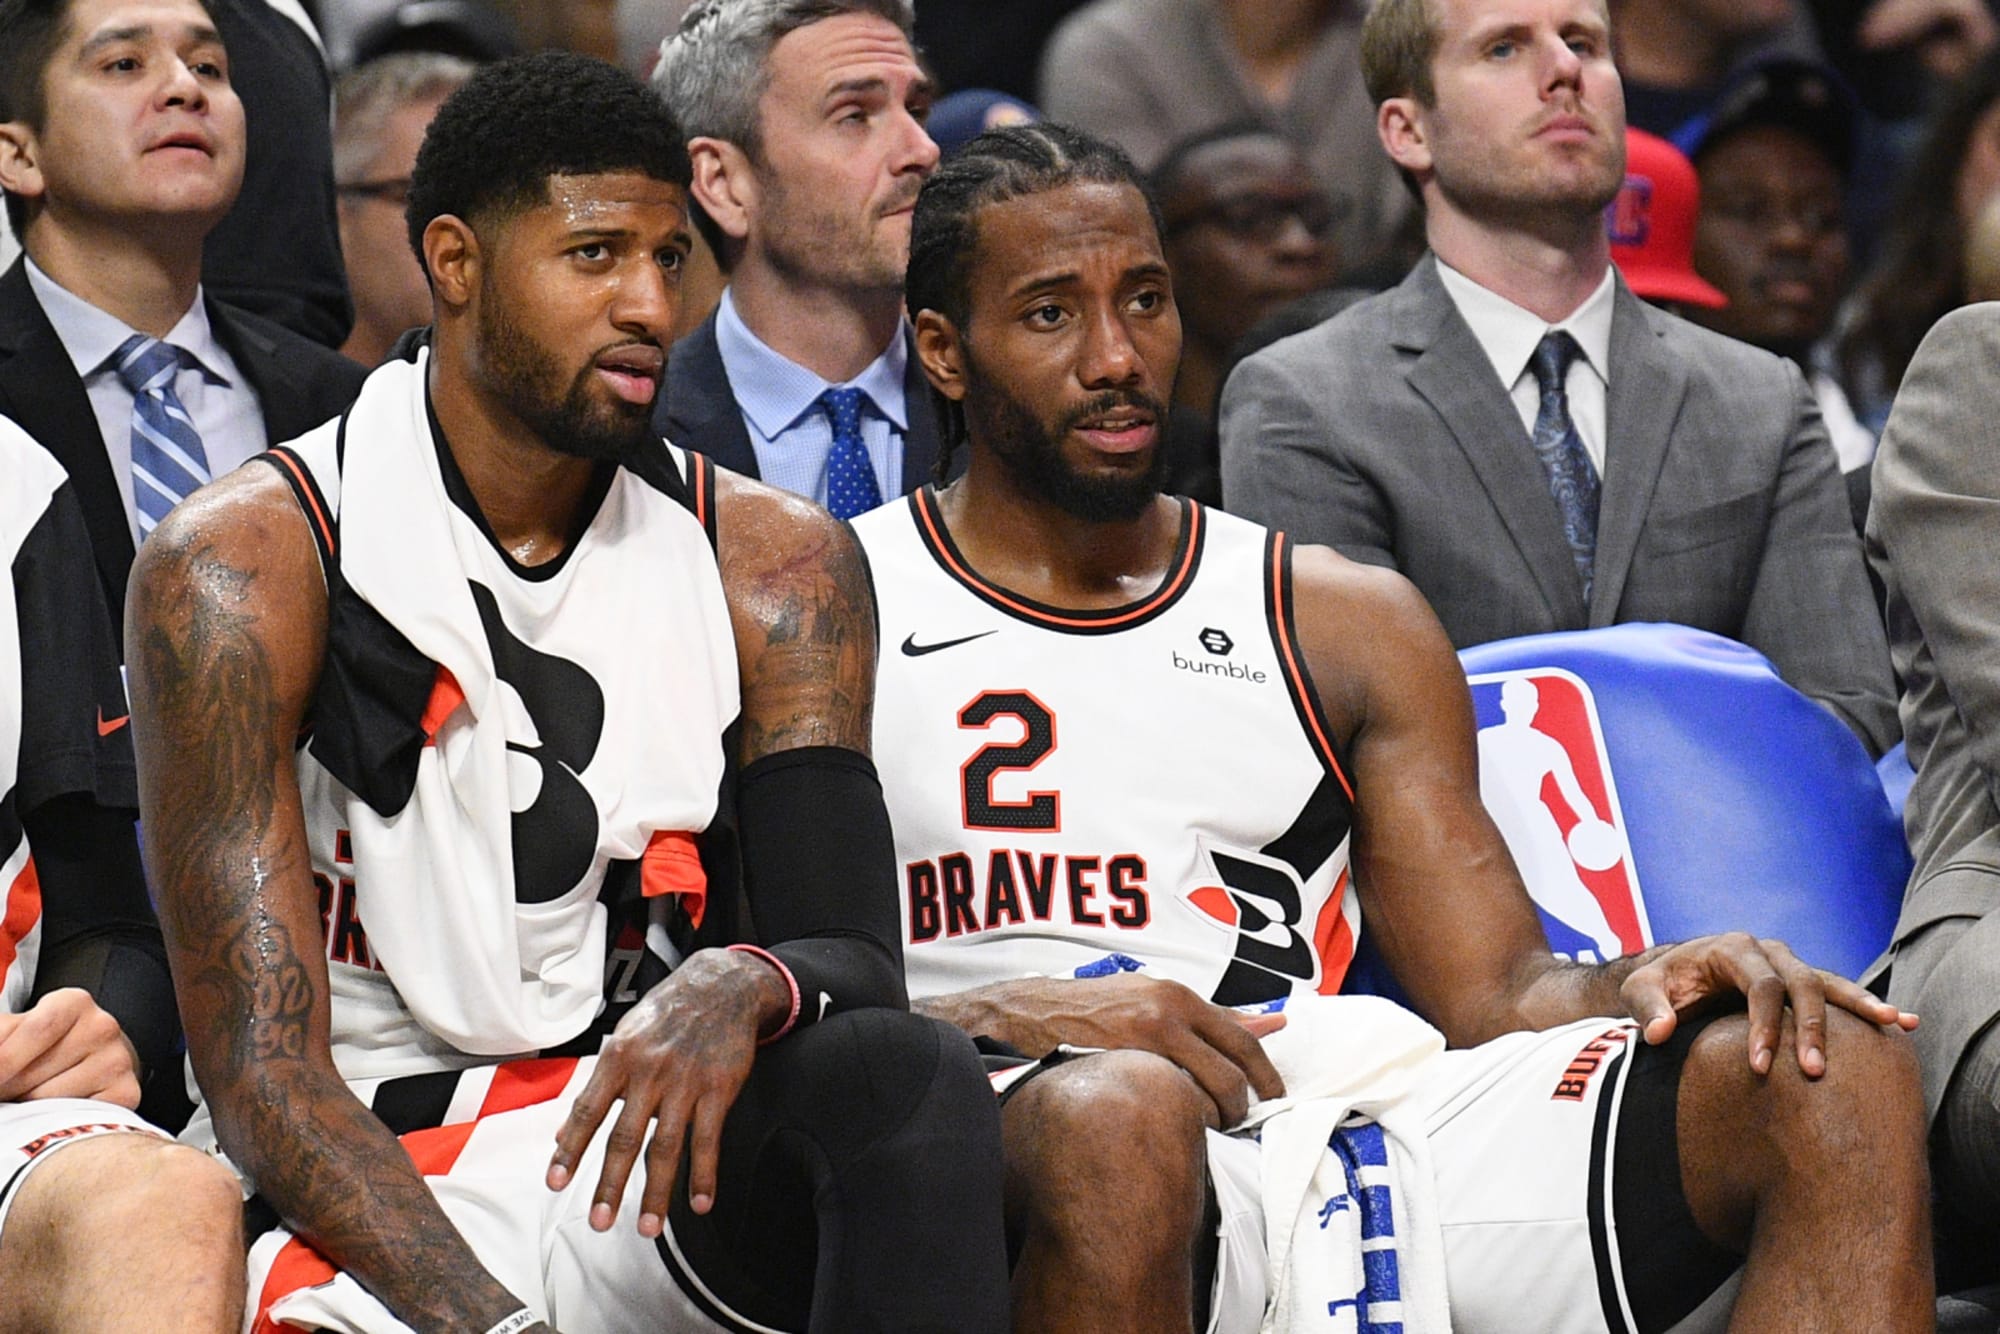 Kawhi Leonard, Paul George traveling for Clippers' road trip but out  Saturday - ESPN